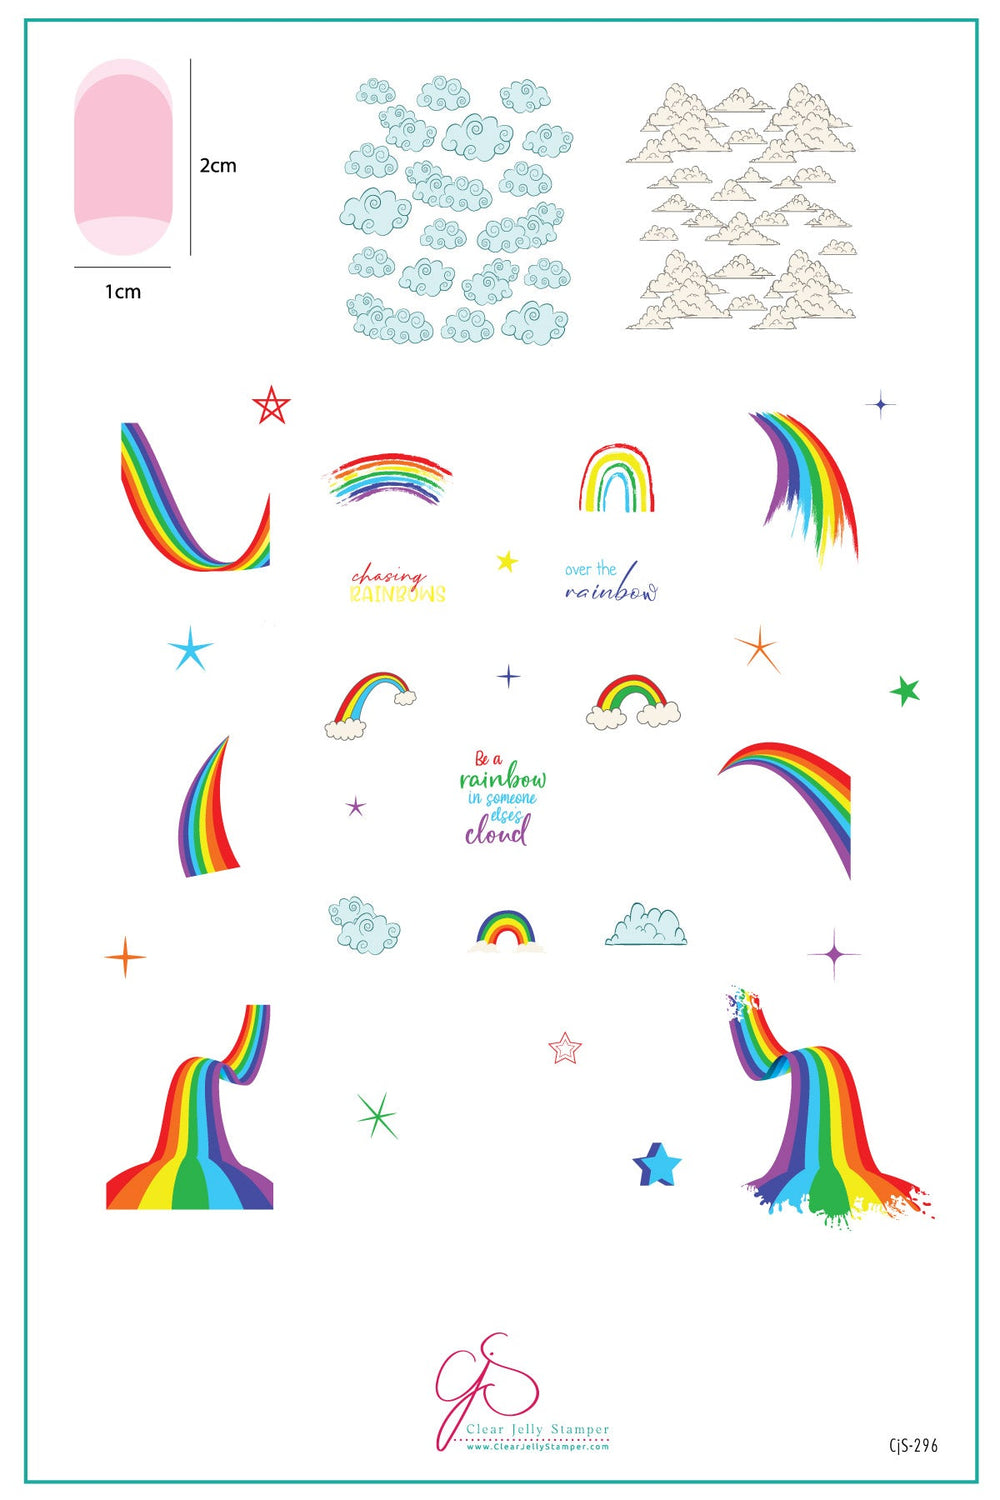 CJS-296 - Chasing Rainbows | Clear Jelly Stamping Plate